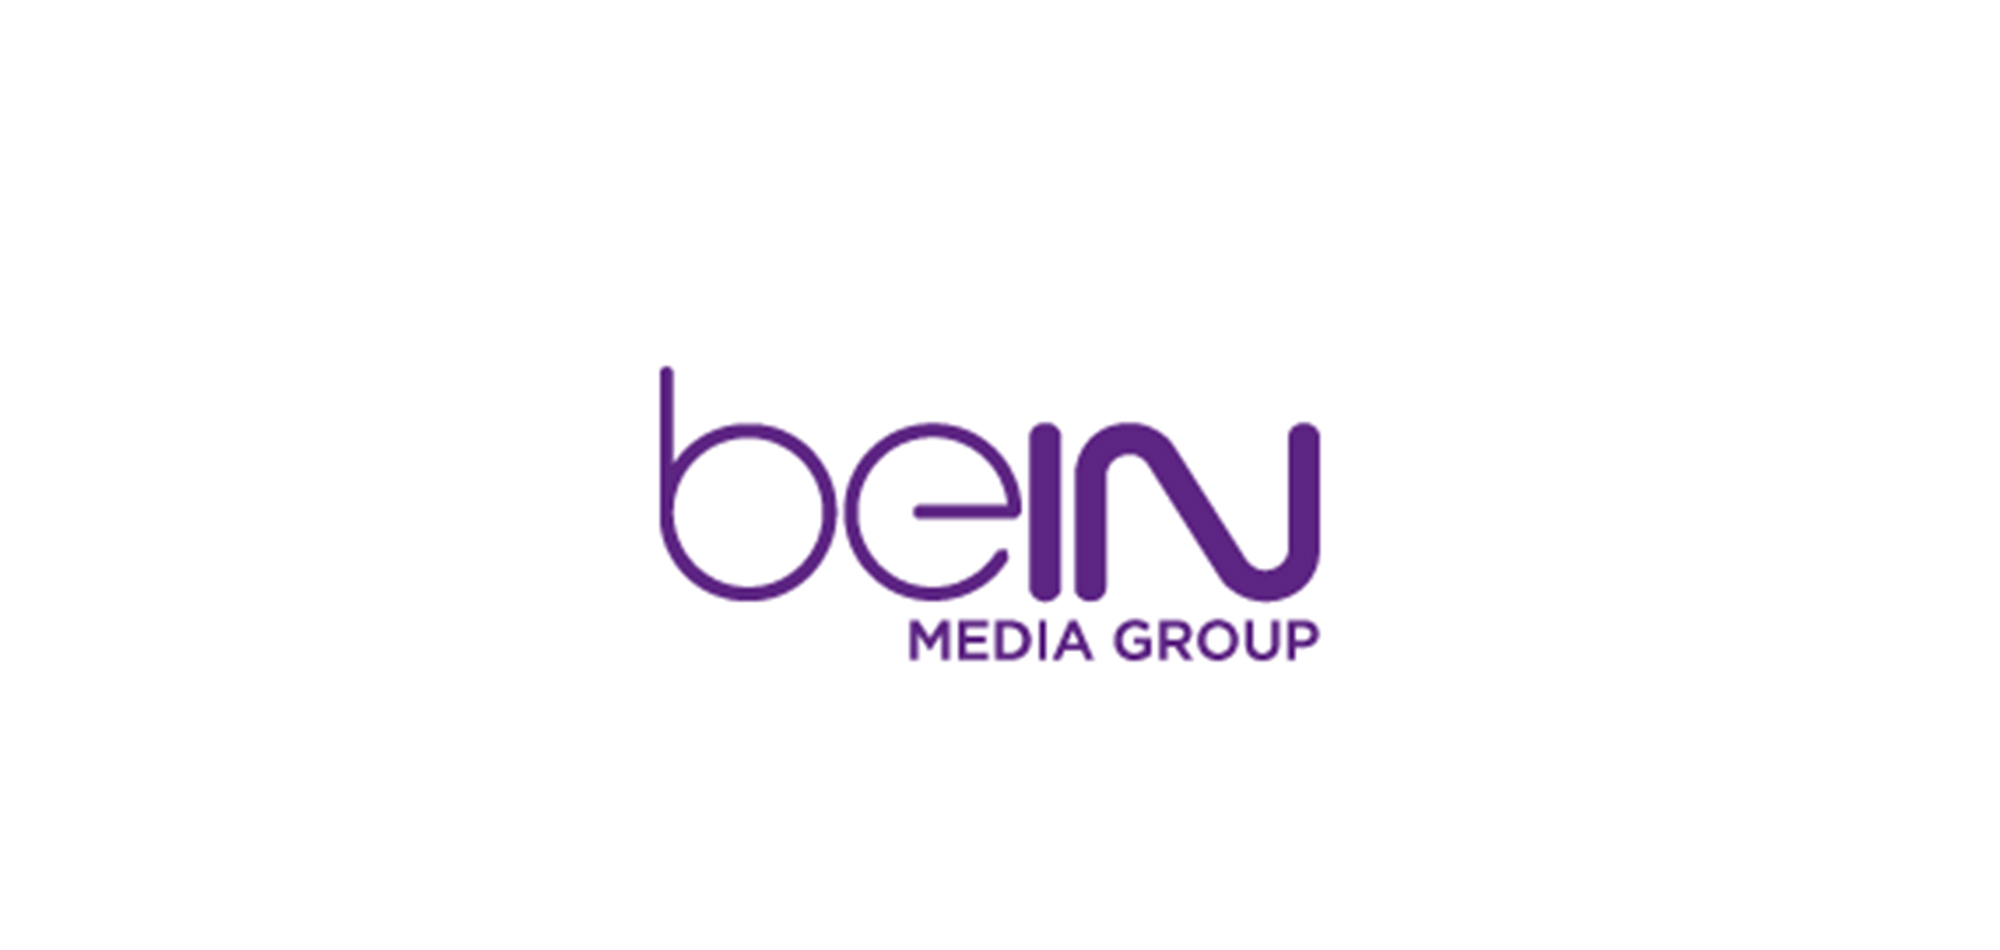 Newcastle takeover hits ANOTHER snag as Saudi Arabia permanently cancels beIN Sports